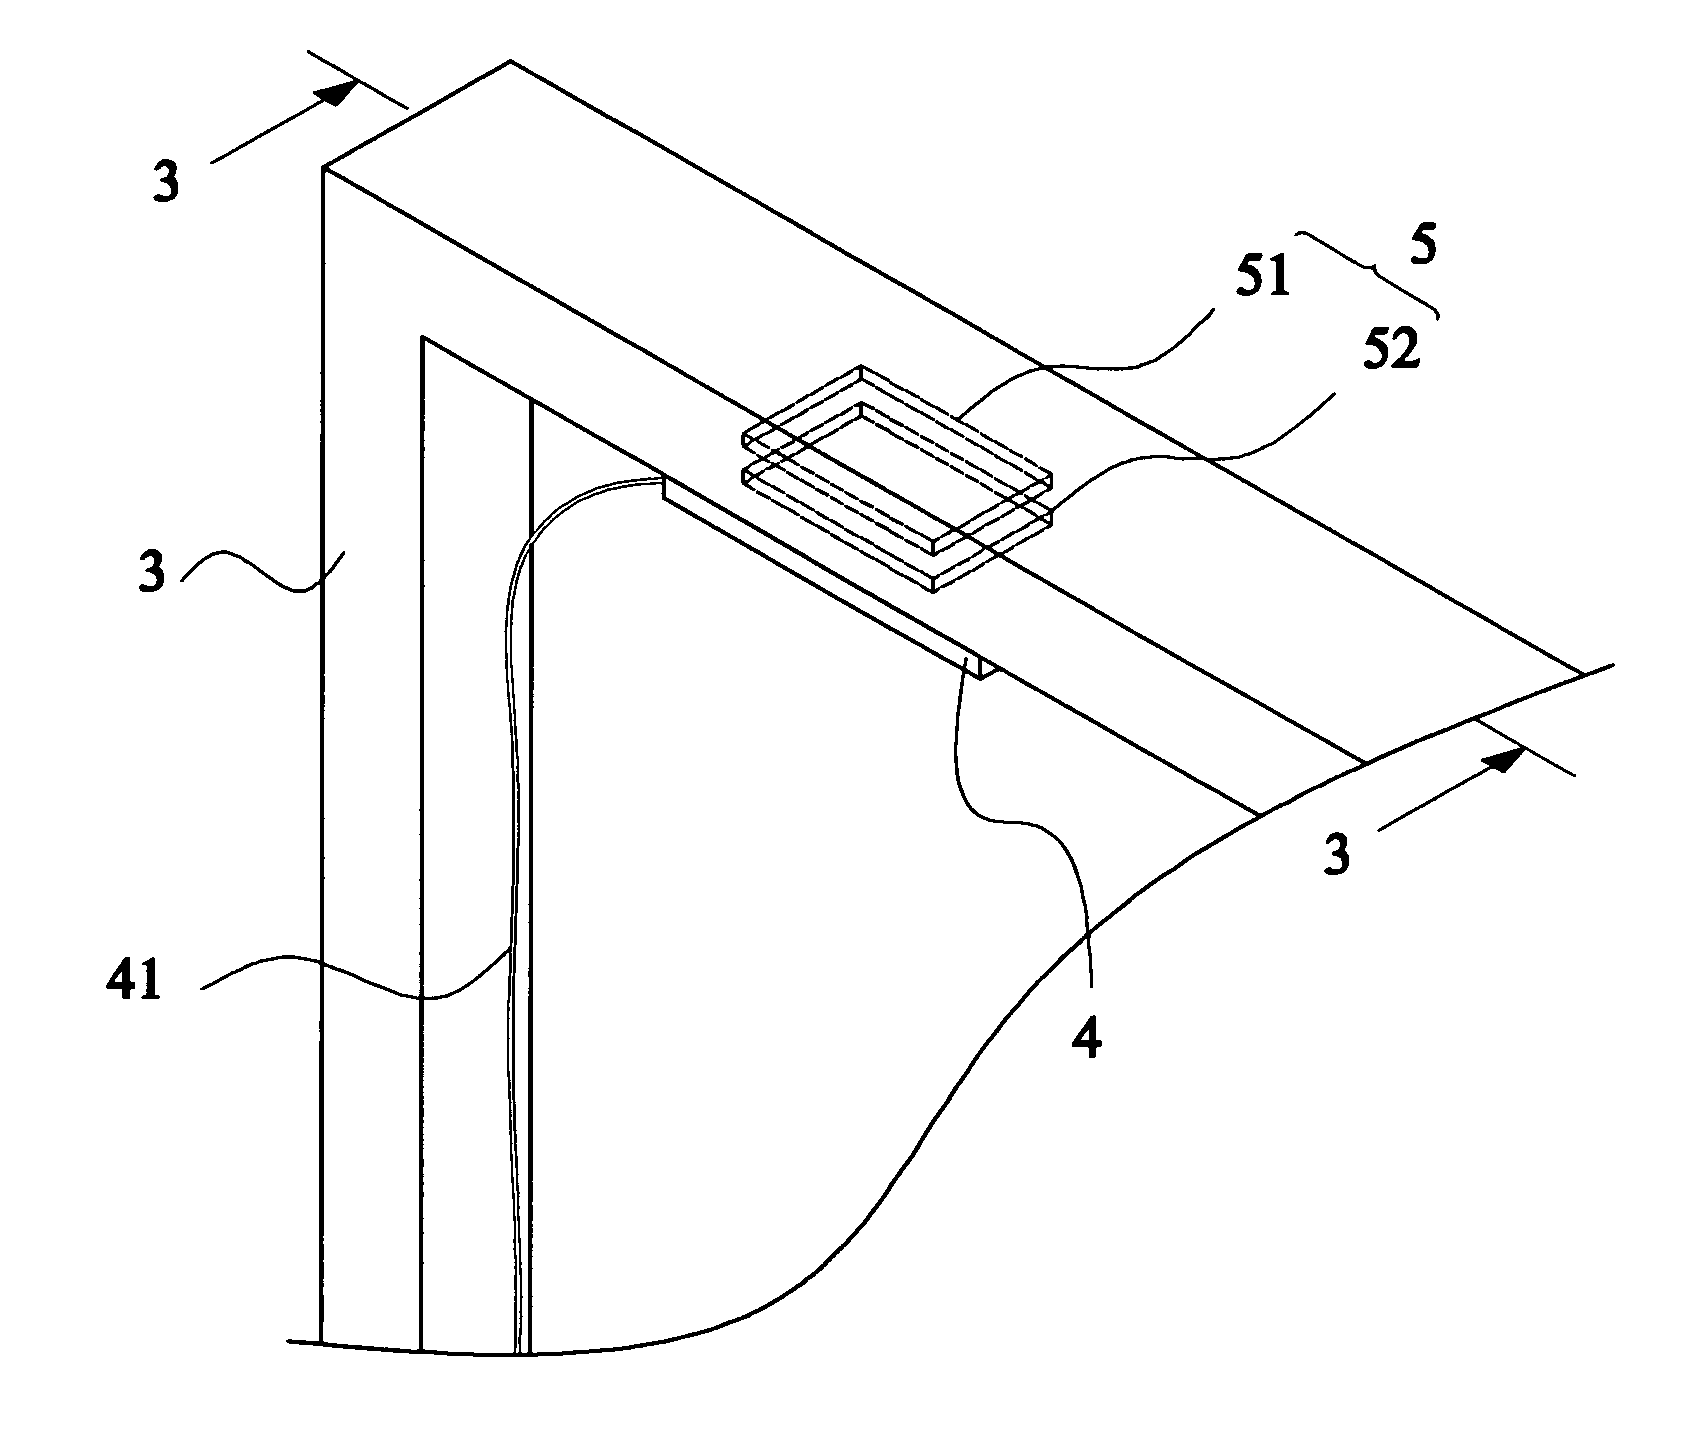 Antenna device with ion-implanted resonant pattern